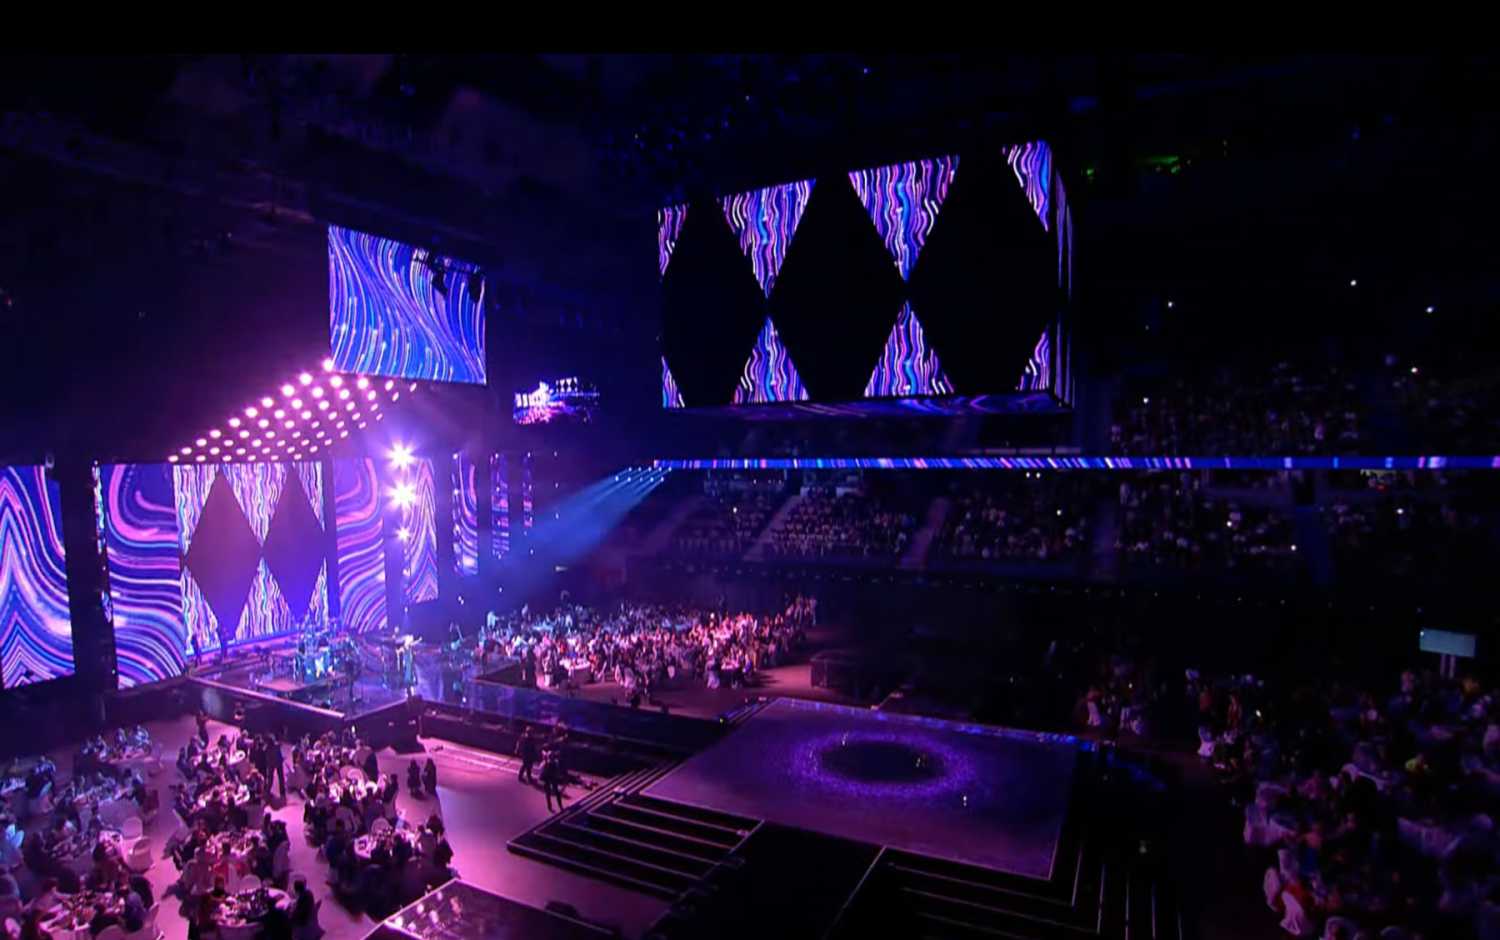 The show was staged at the 17,00-capacity WiZink Centre in Madrid